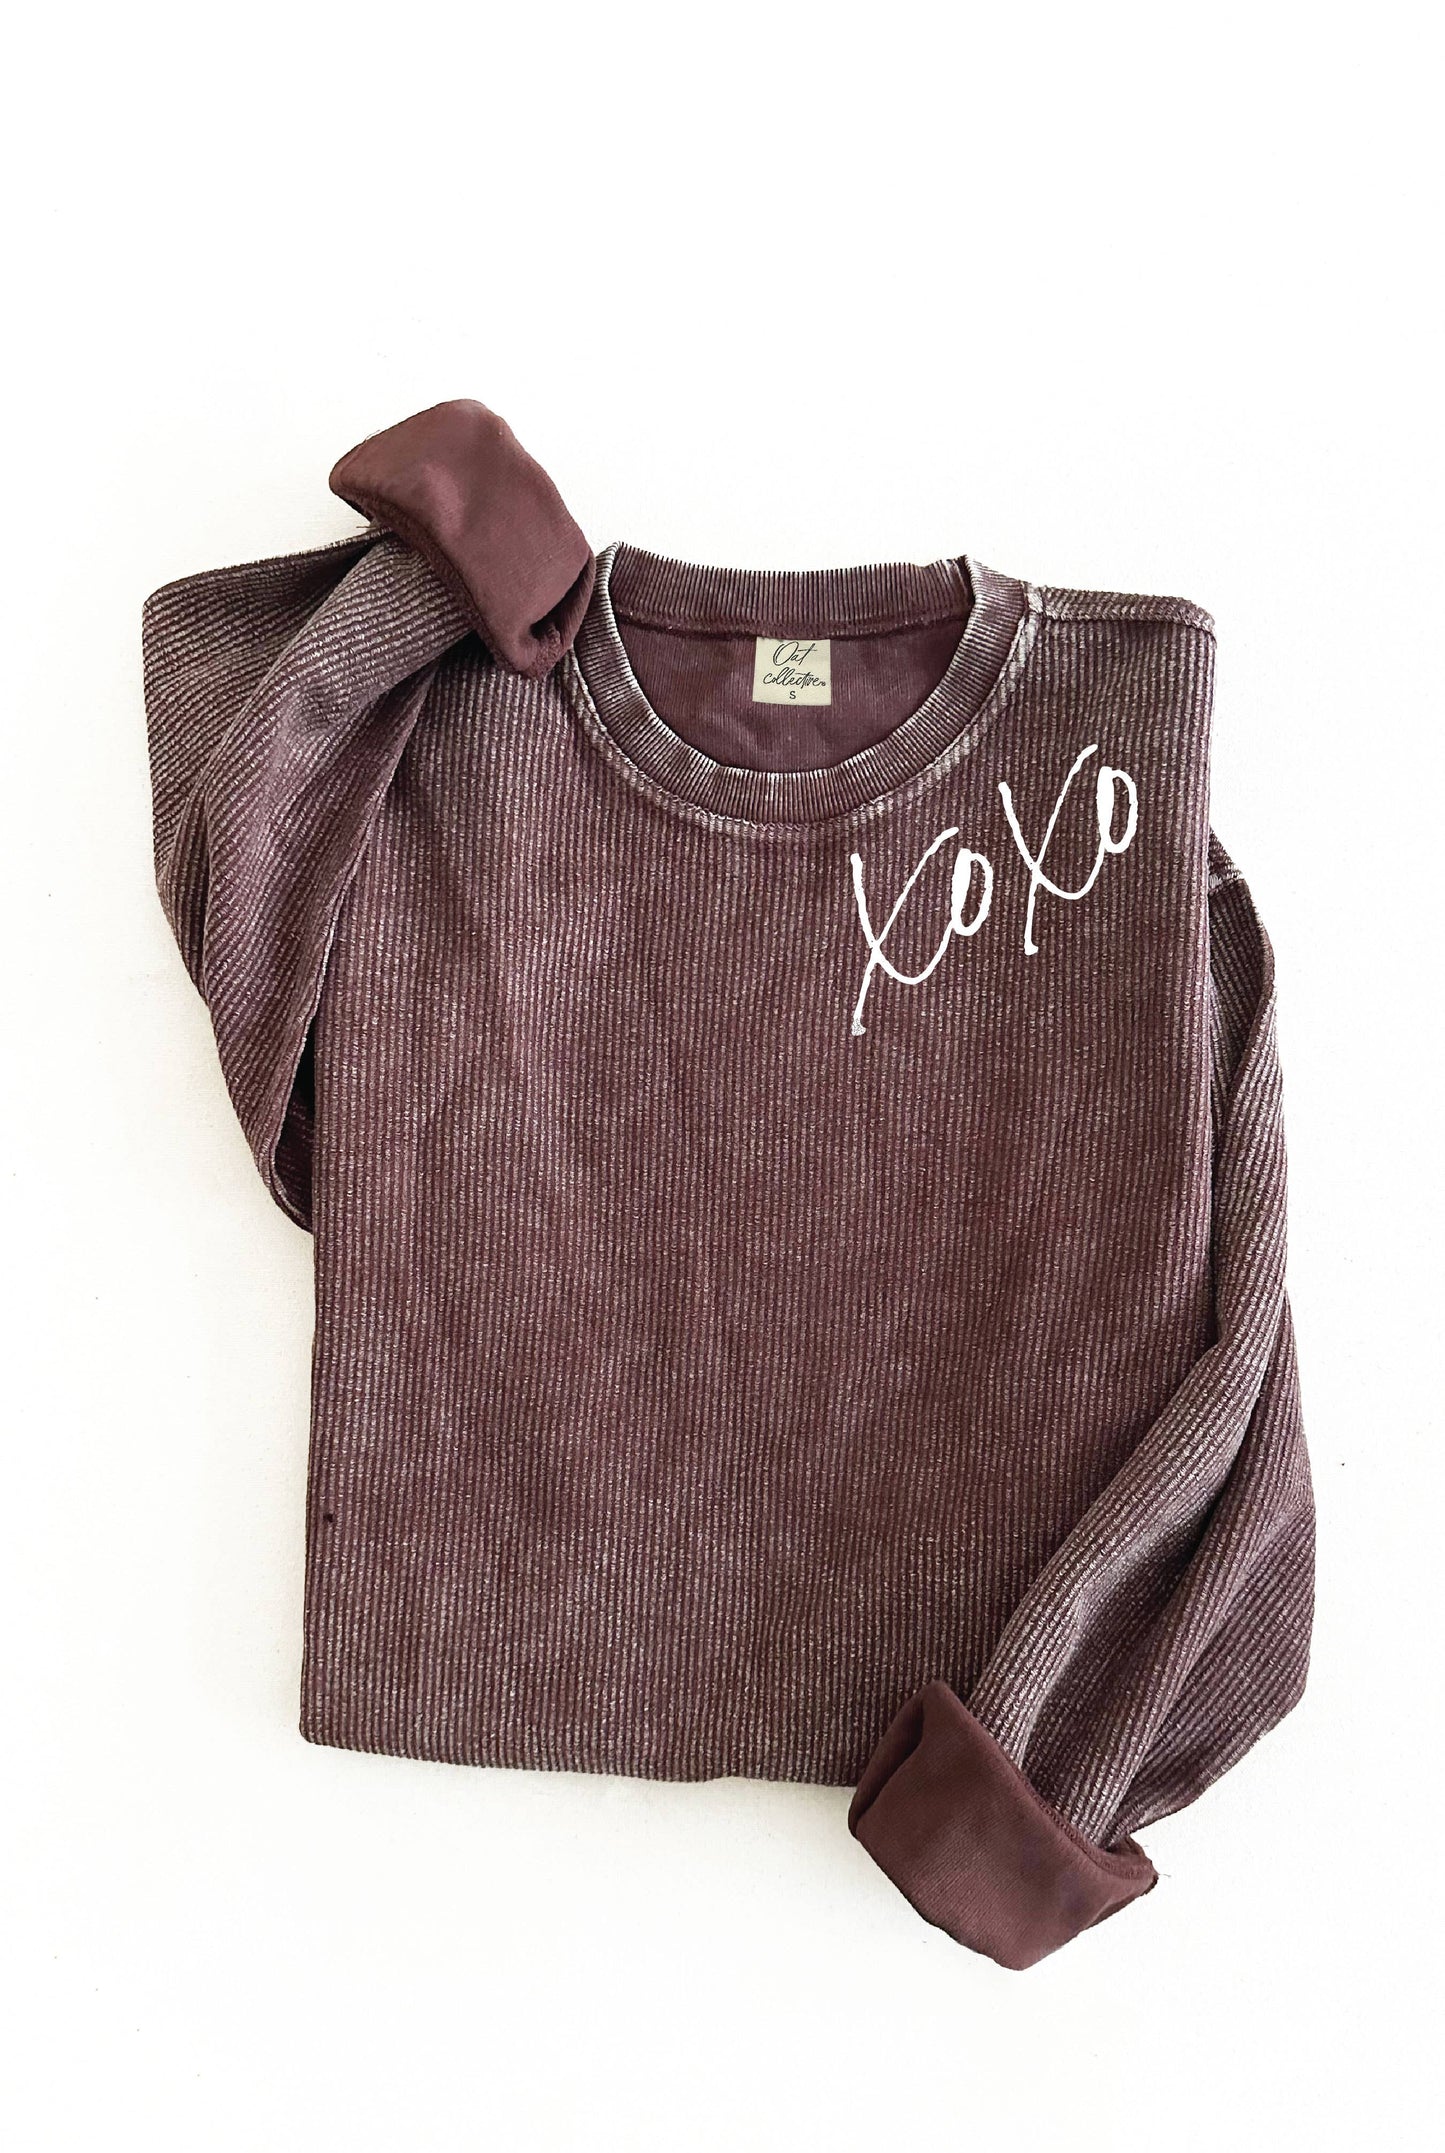 XOXO Thermal Vintage Pullover: XL / LATTE